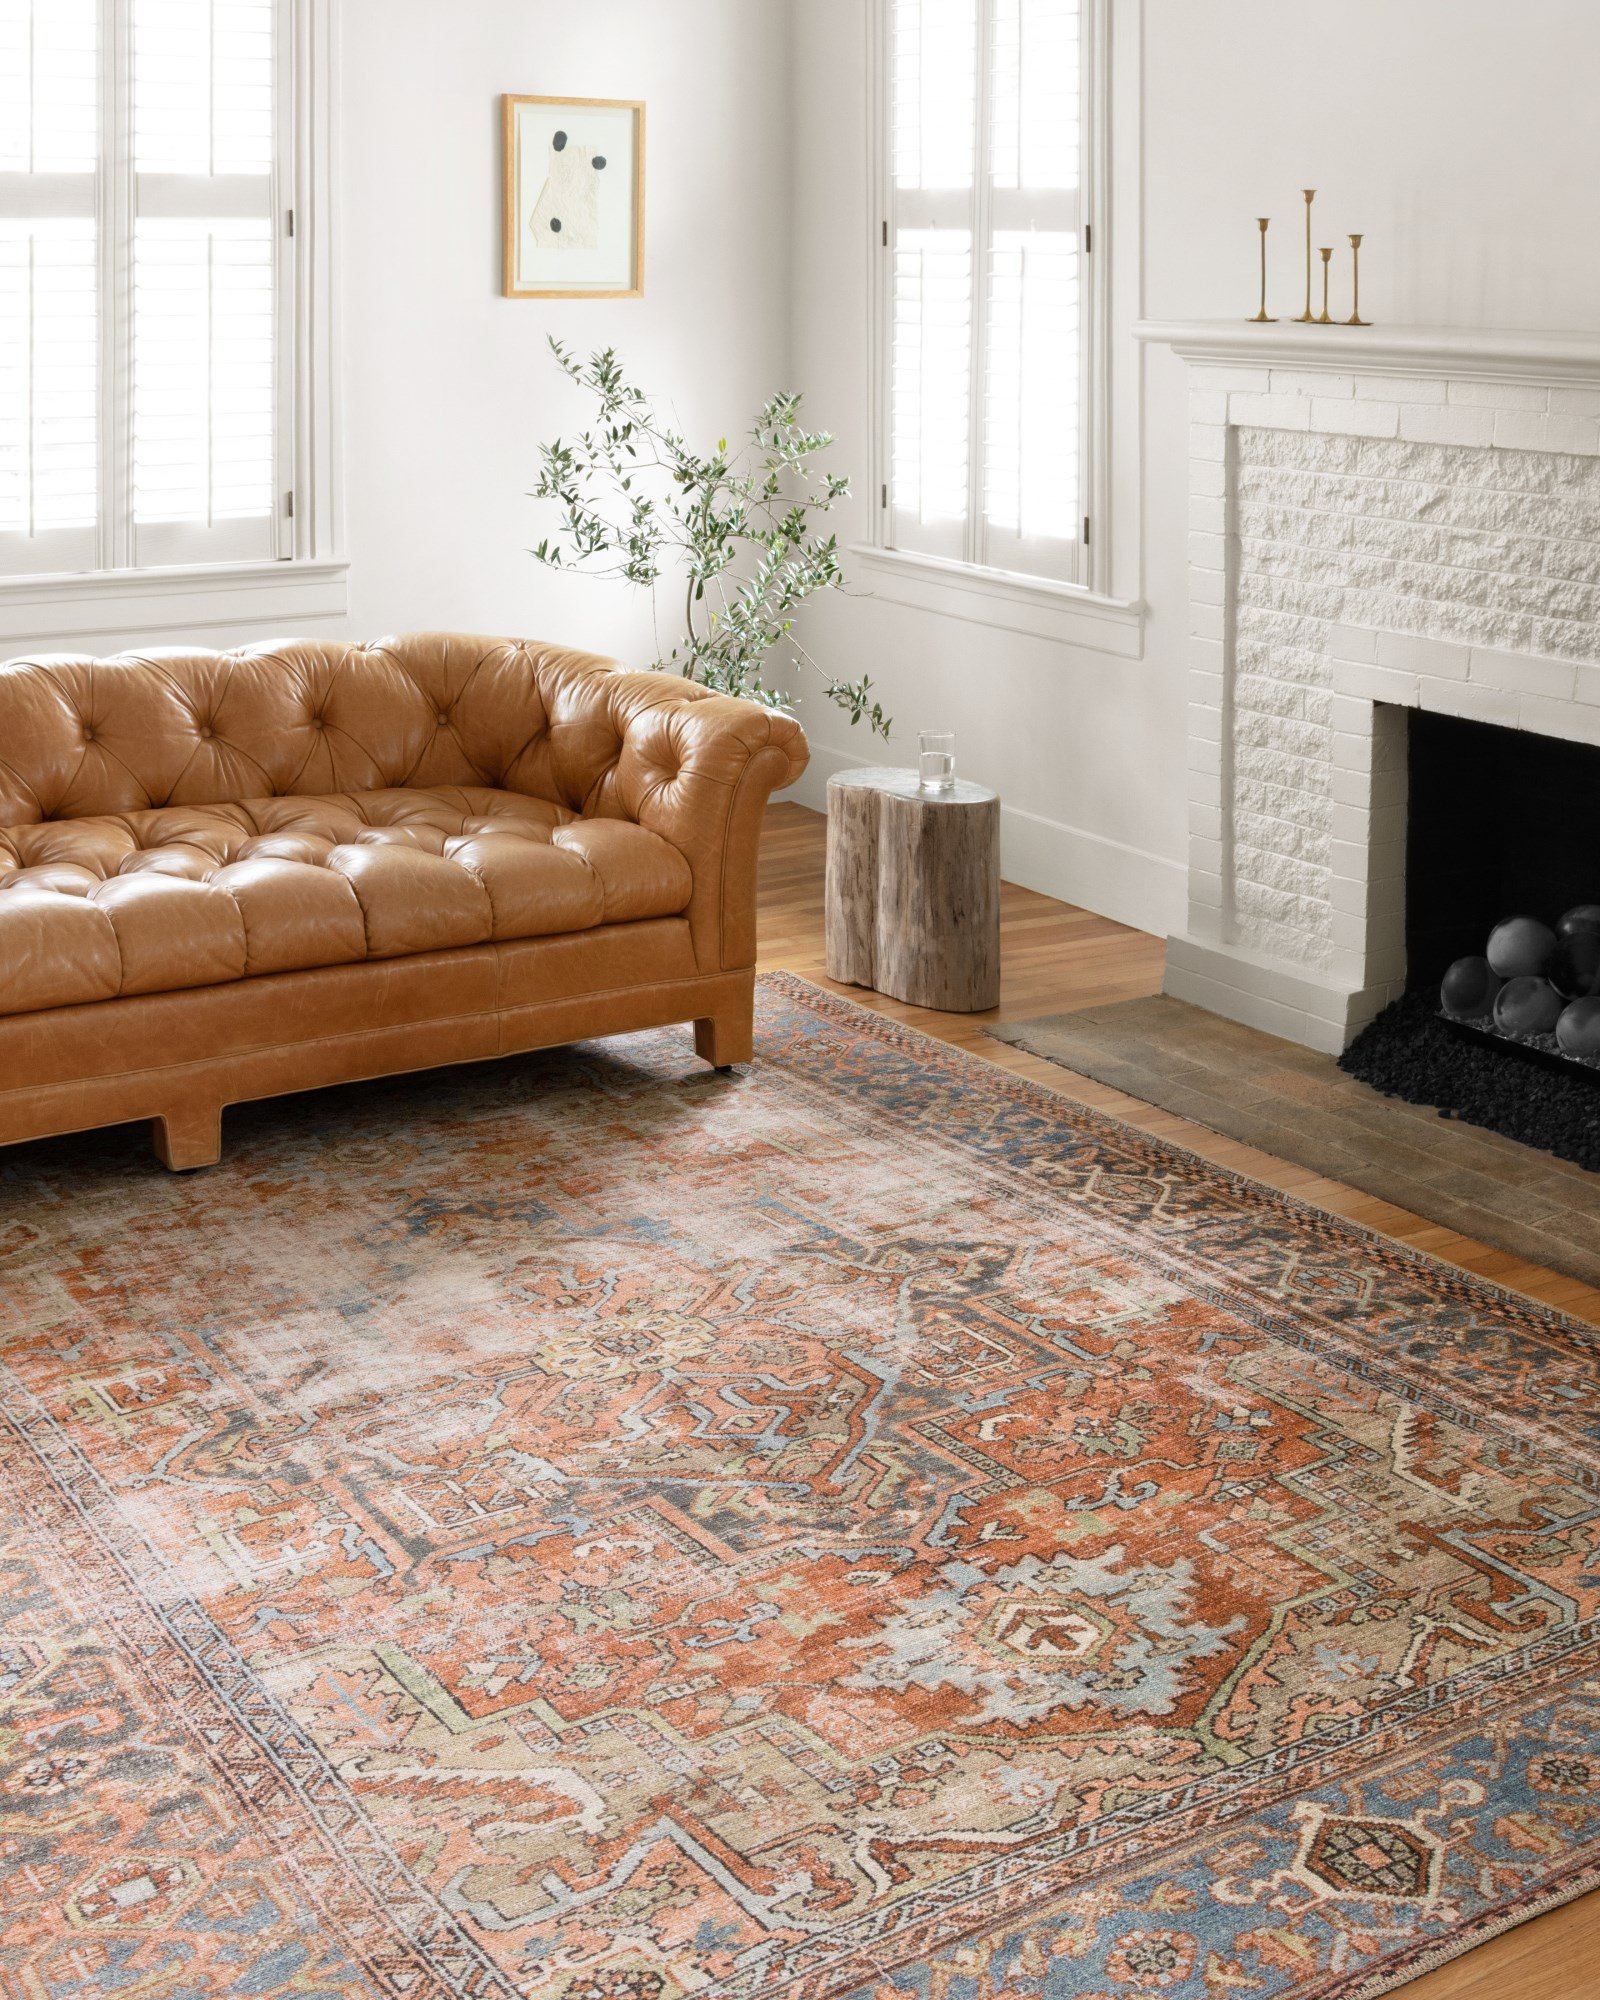 Rug Size Guide - Rugs Direct Help and Advice Centre